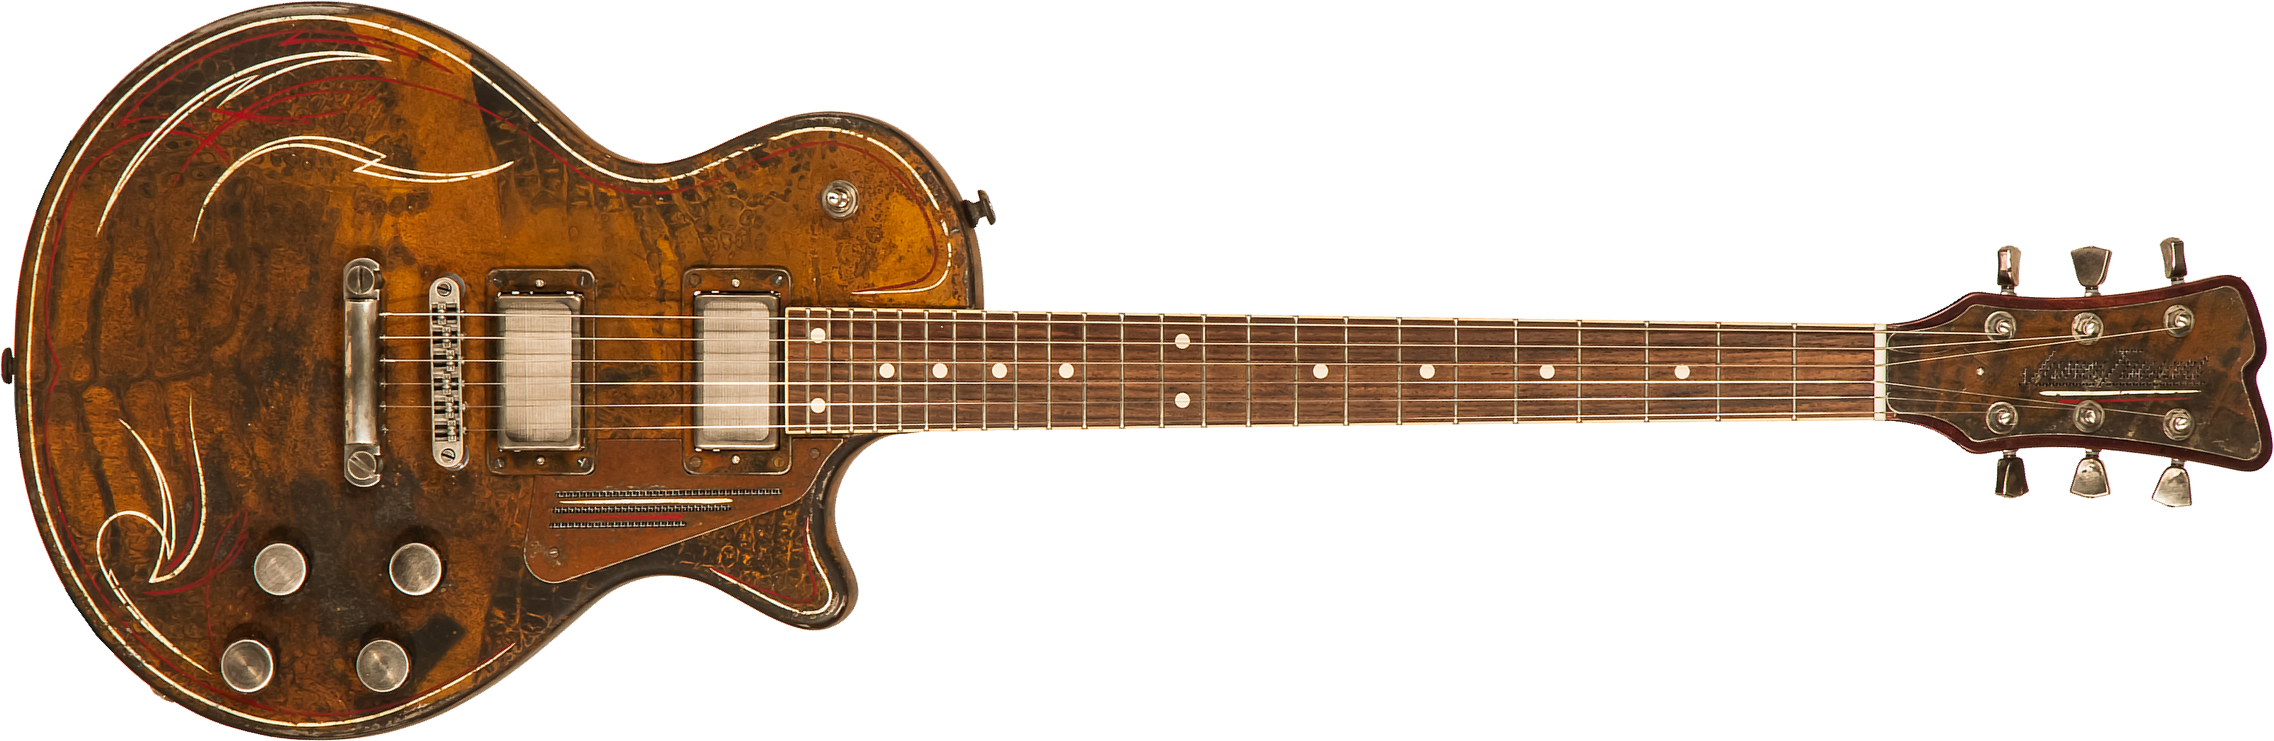 James Trussart Steeldeville Perf.back 2h Ht Rw #21171 - Rust O Matic Pinstriped - Single cut electric guitar - Main picture